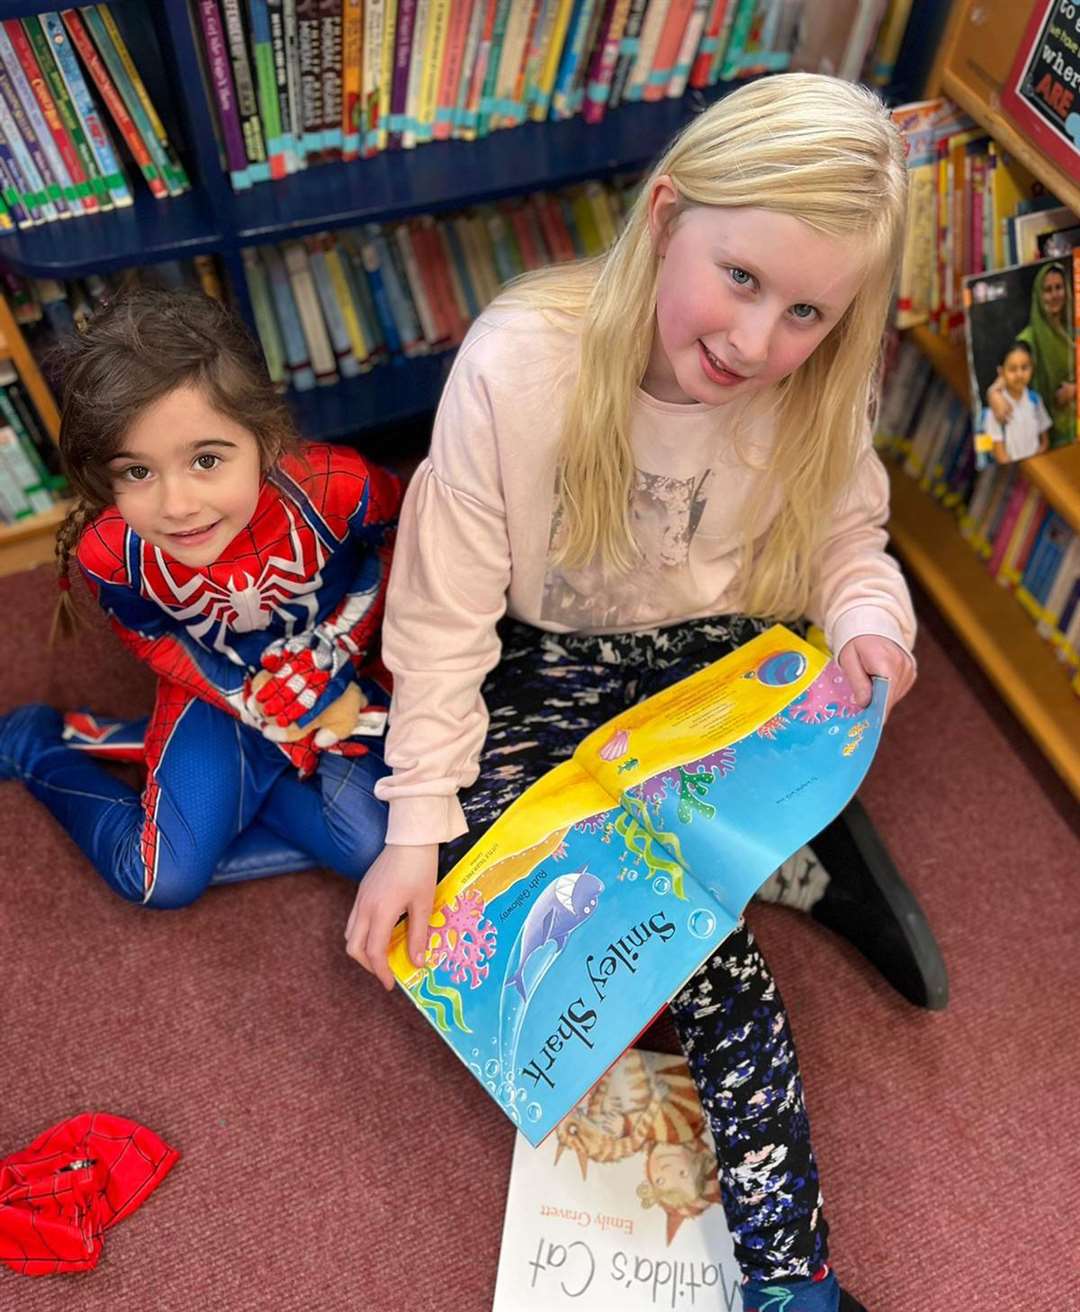 Spidergirl took part in paired reading activities with her reading buddy.